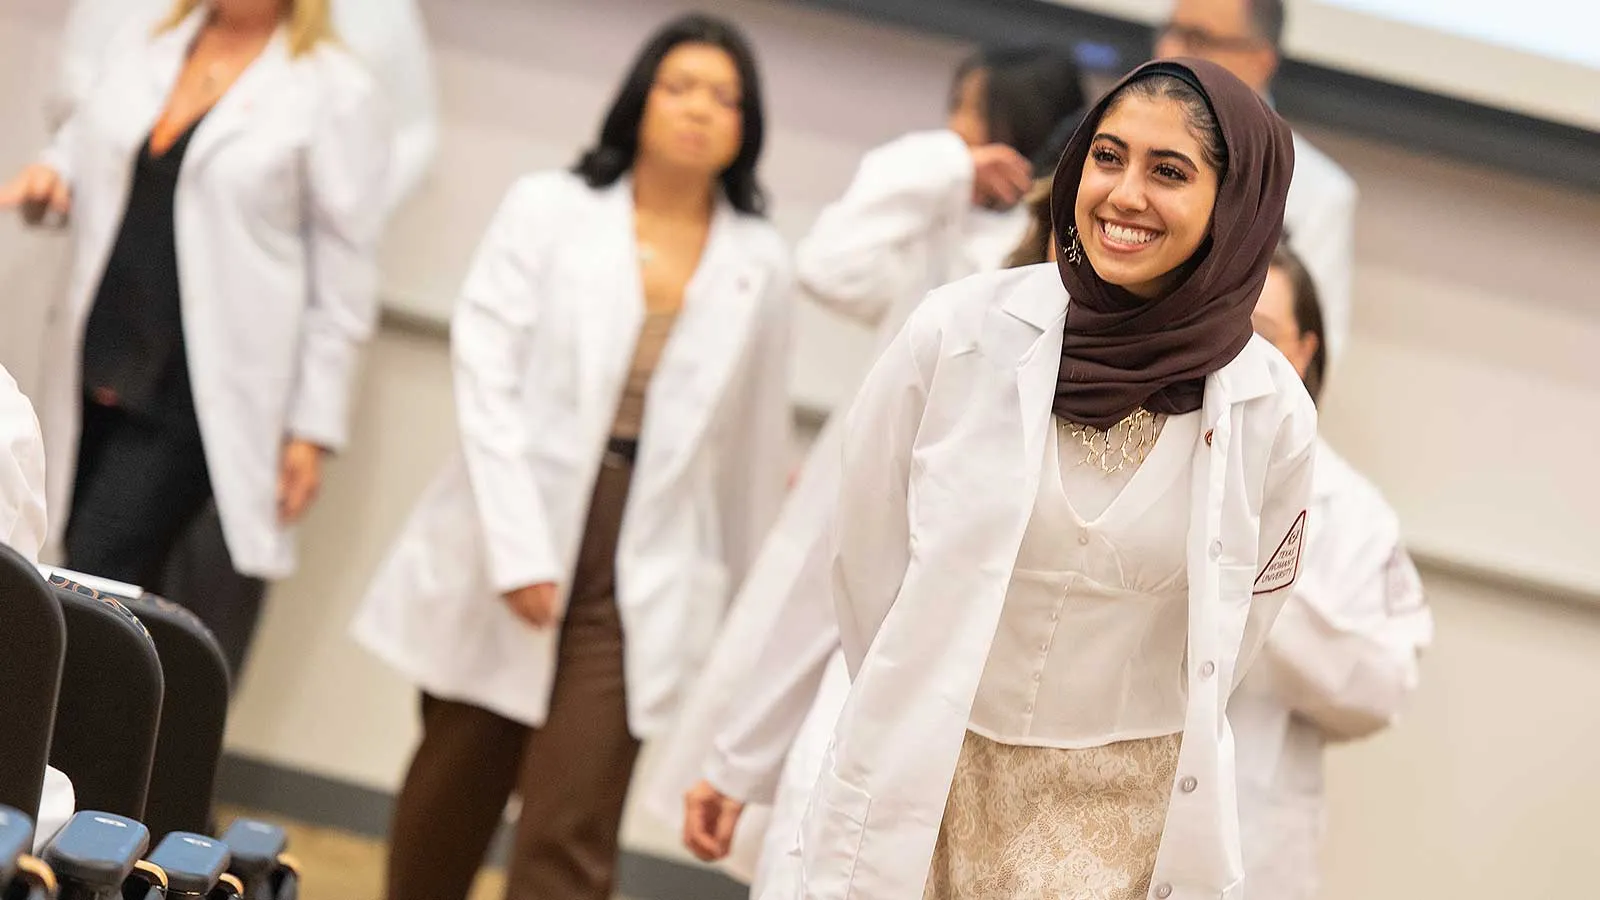 TWU Students in Lab Coats